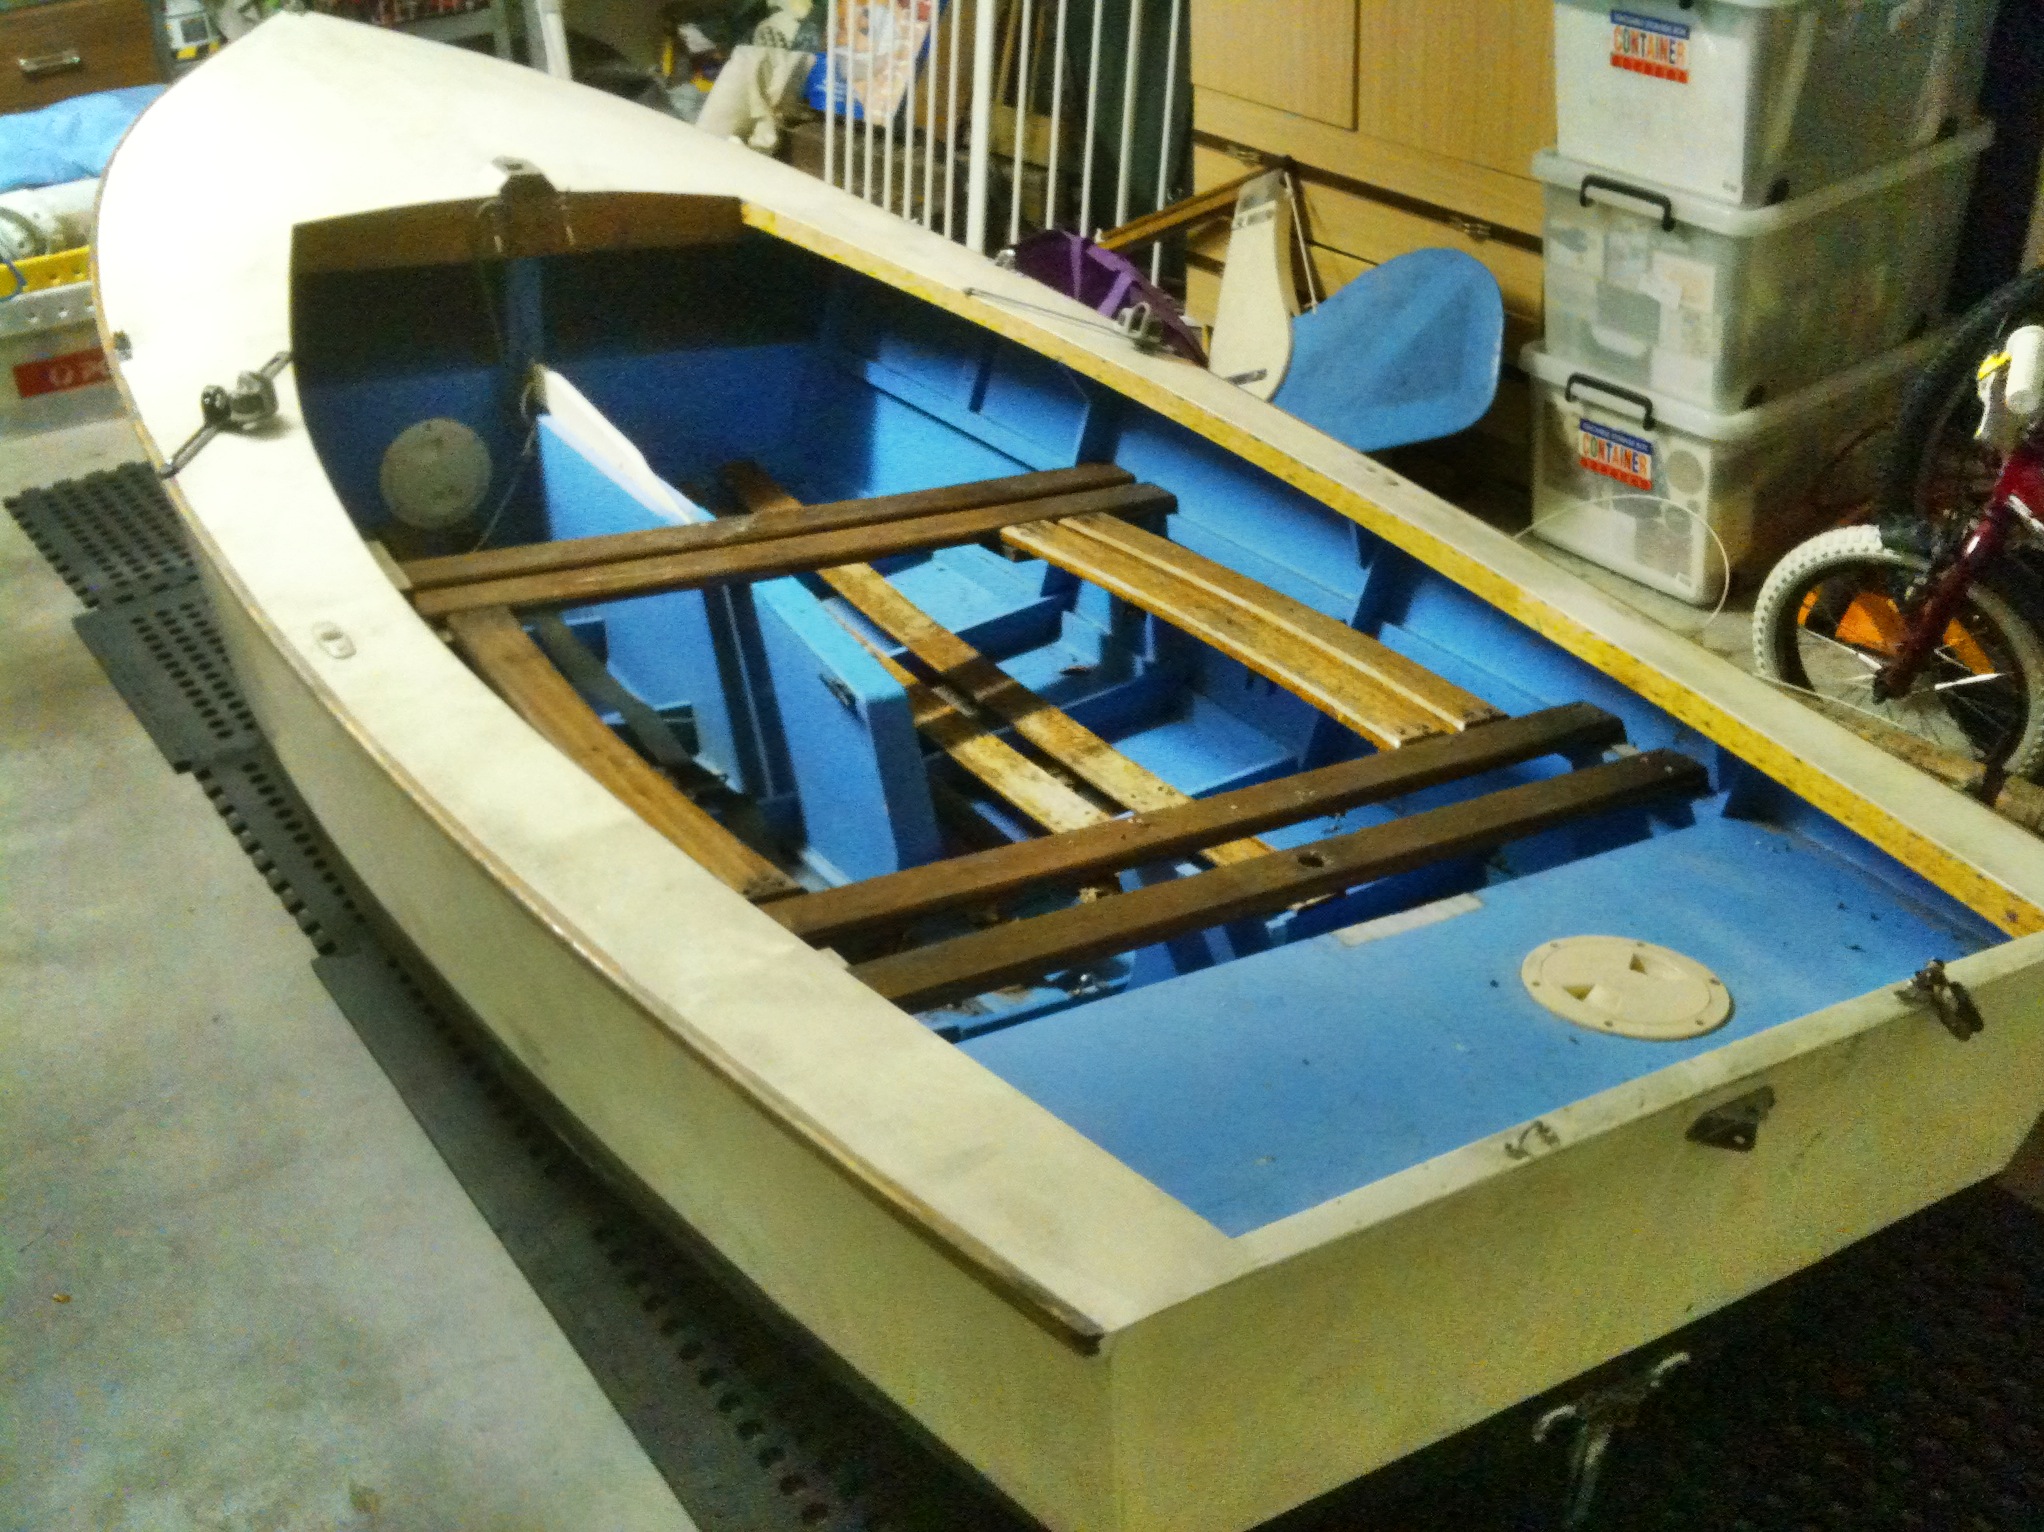 Posted in Heron Sailing Dinghy | Tagged Heron , restoration | 2 